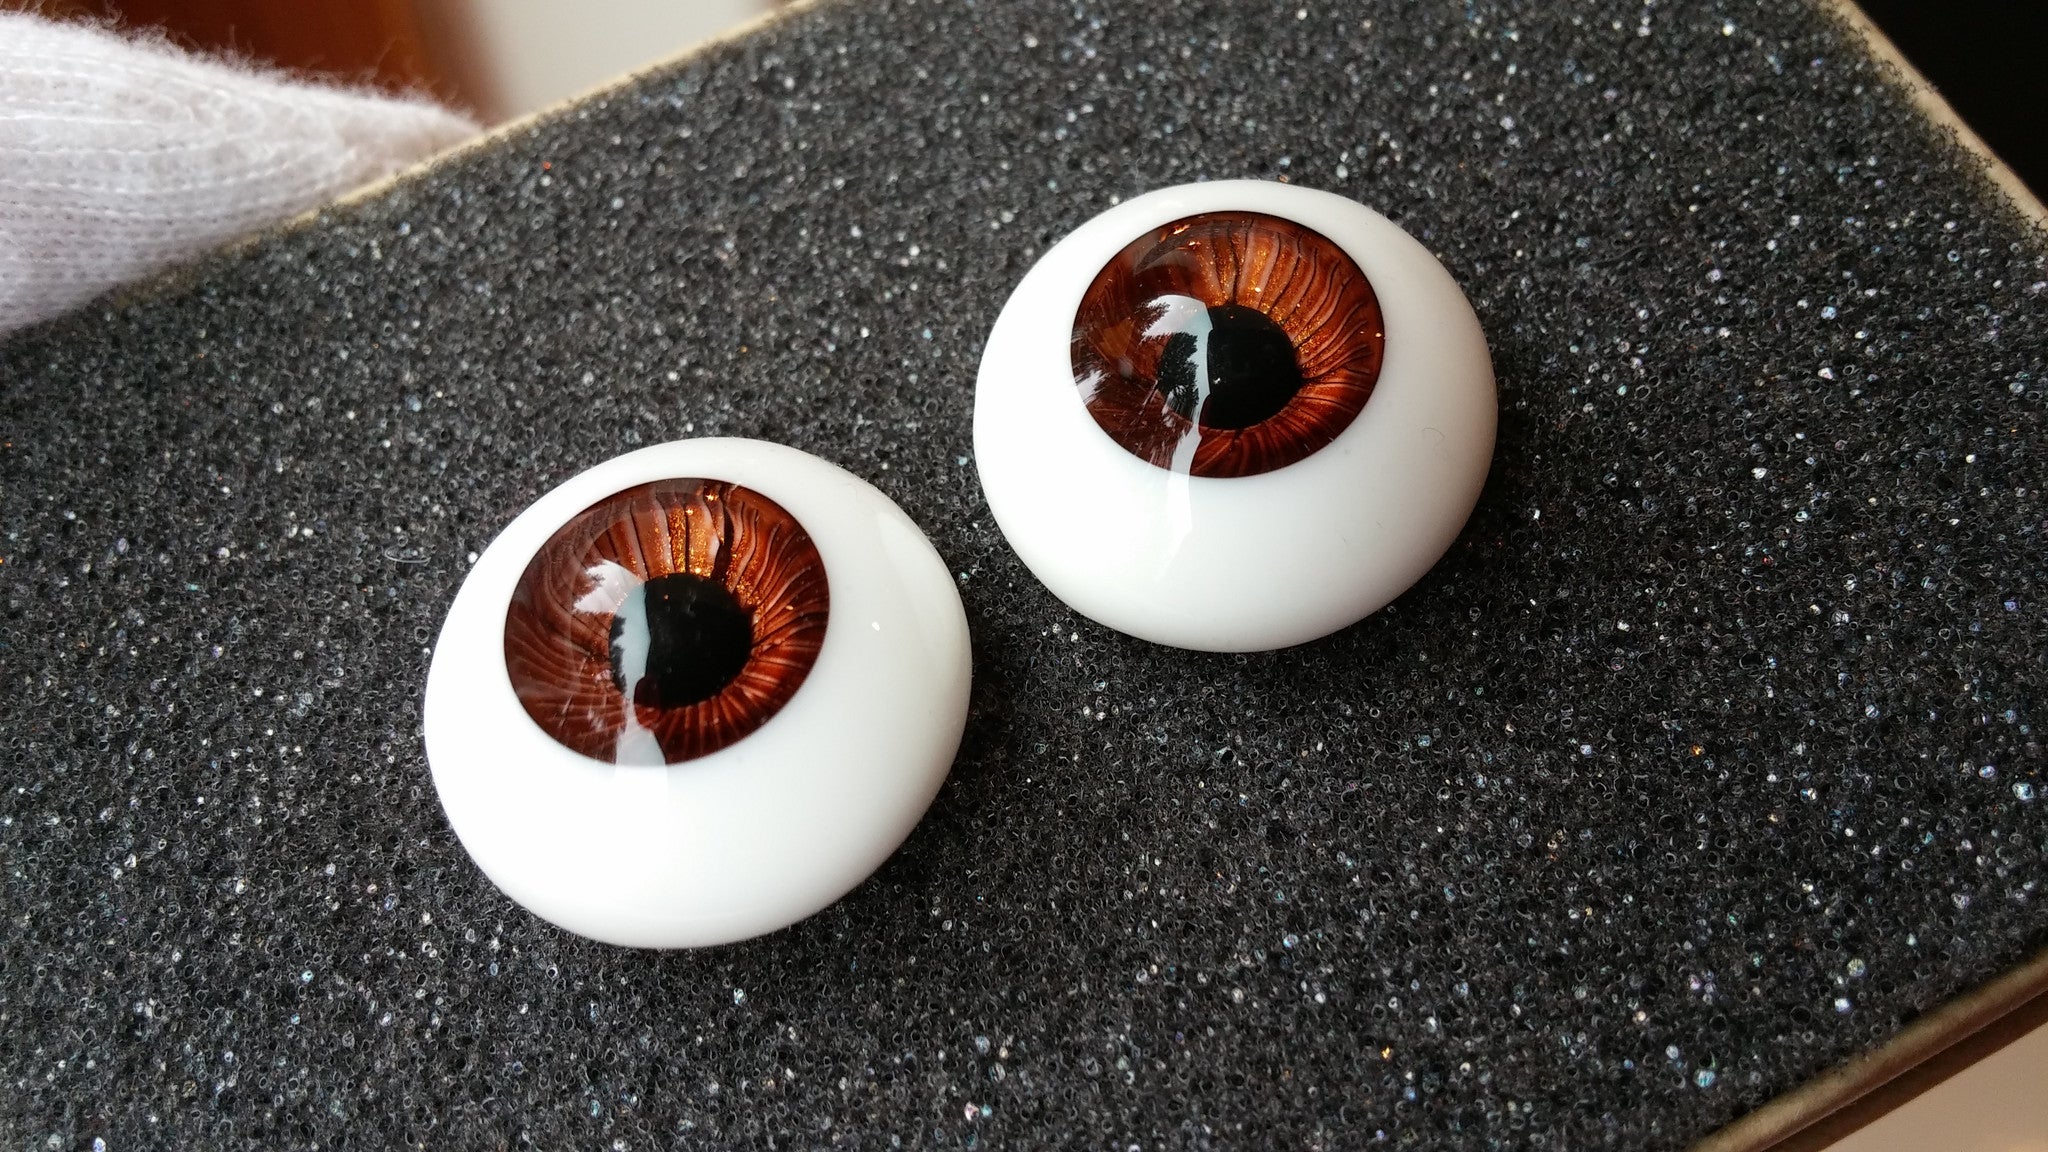 DollBakery Urethane BJD eyes -   SOLD 18mm Rootbeer - 1